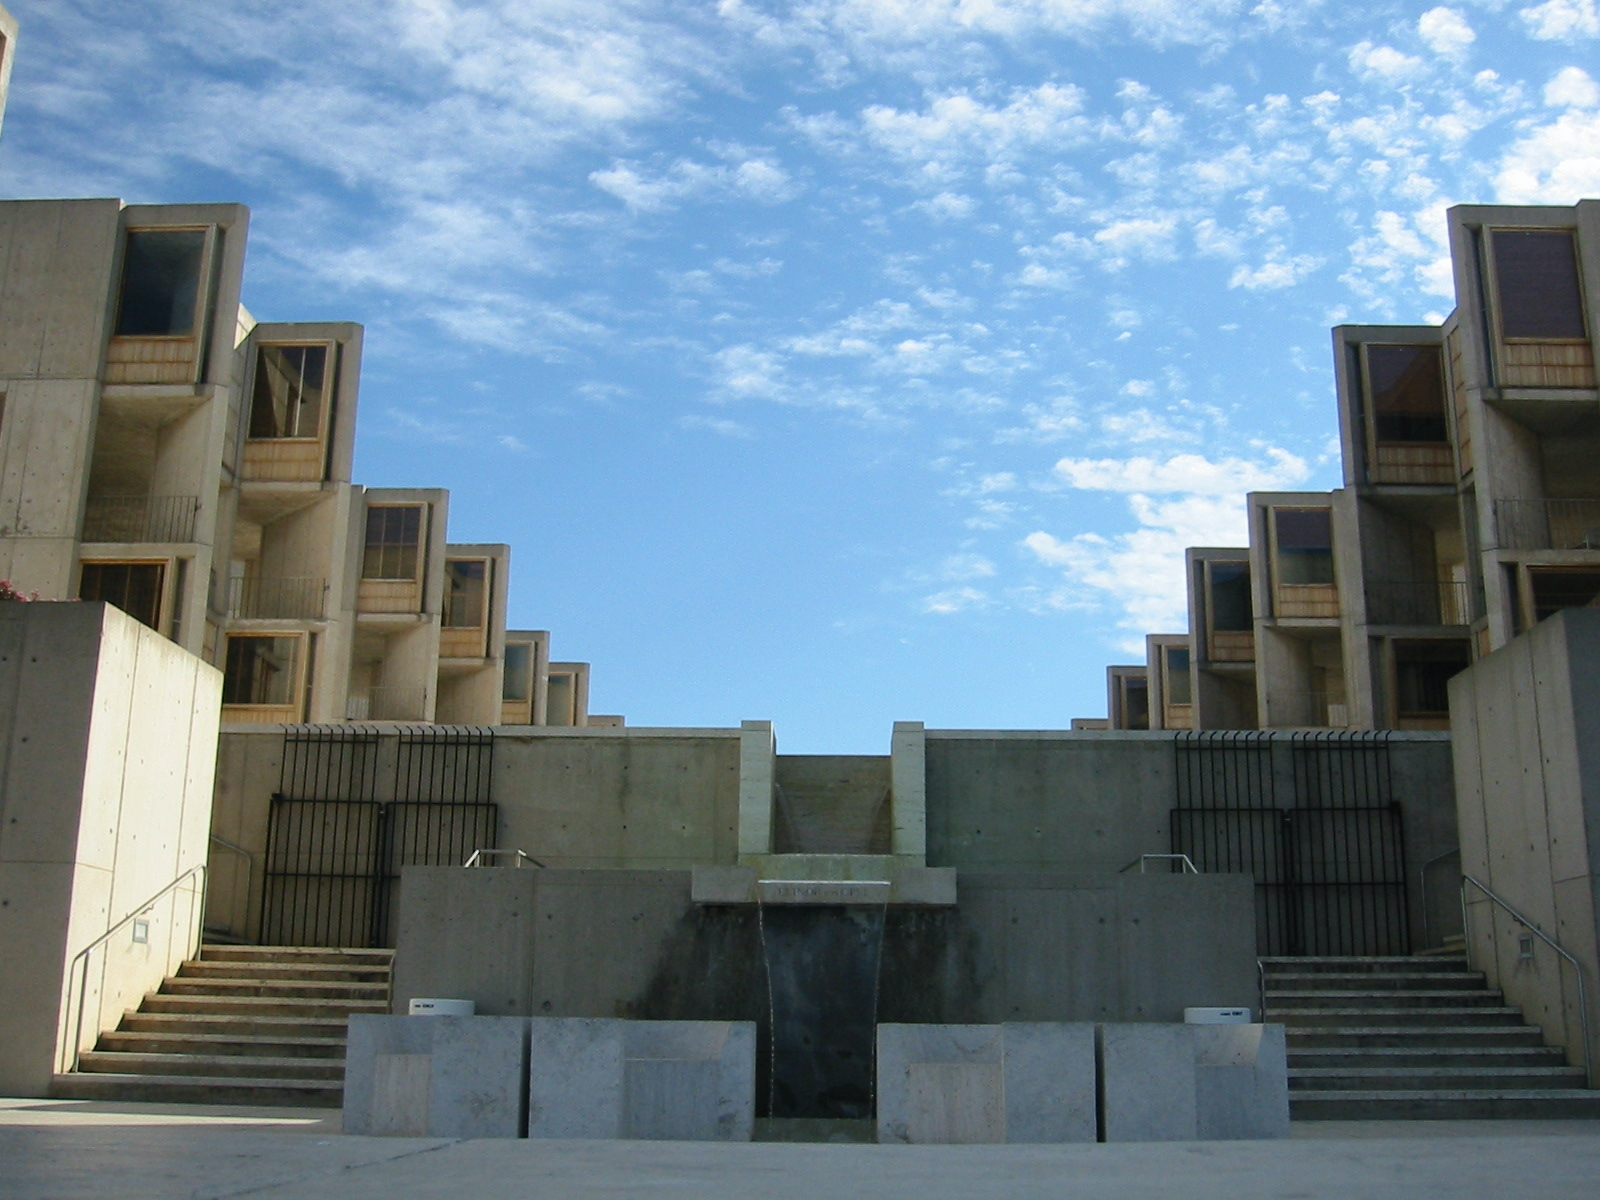 The iconic central plaza at the Salk Institute for Biological